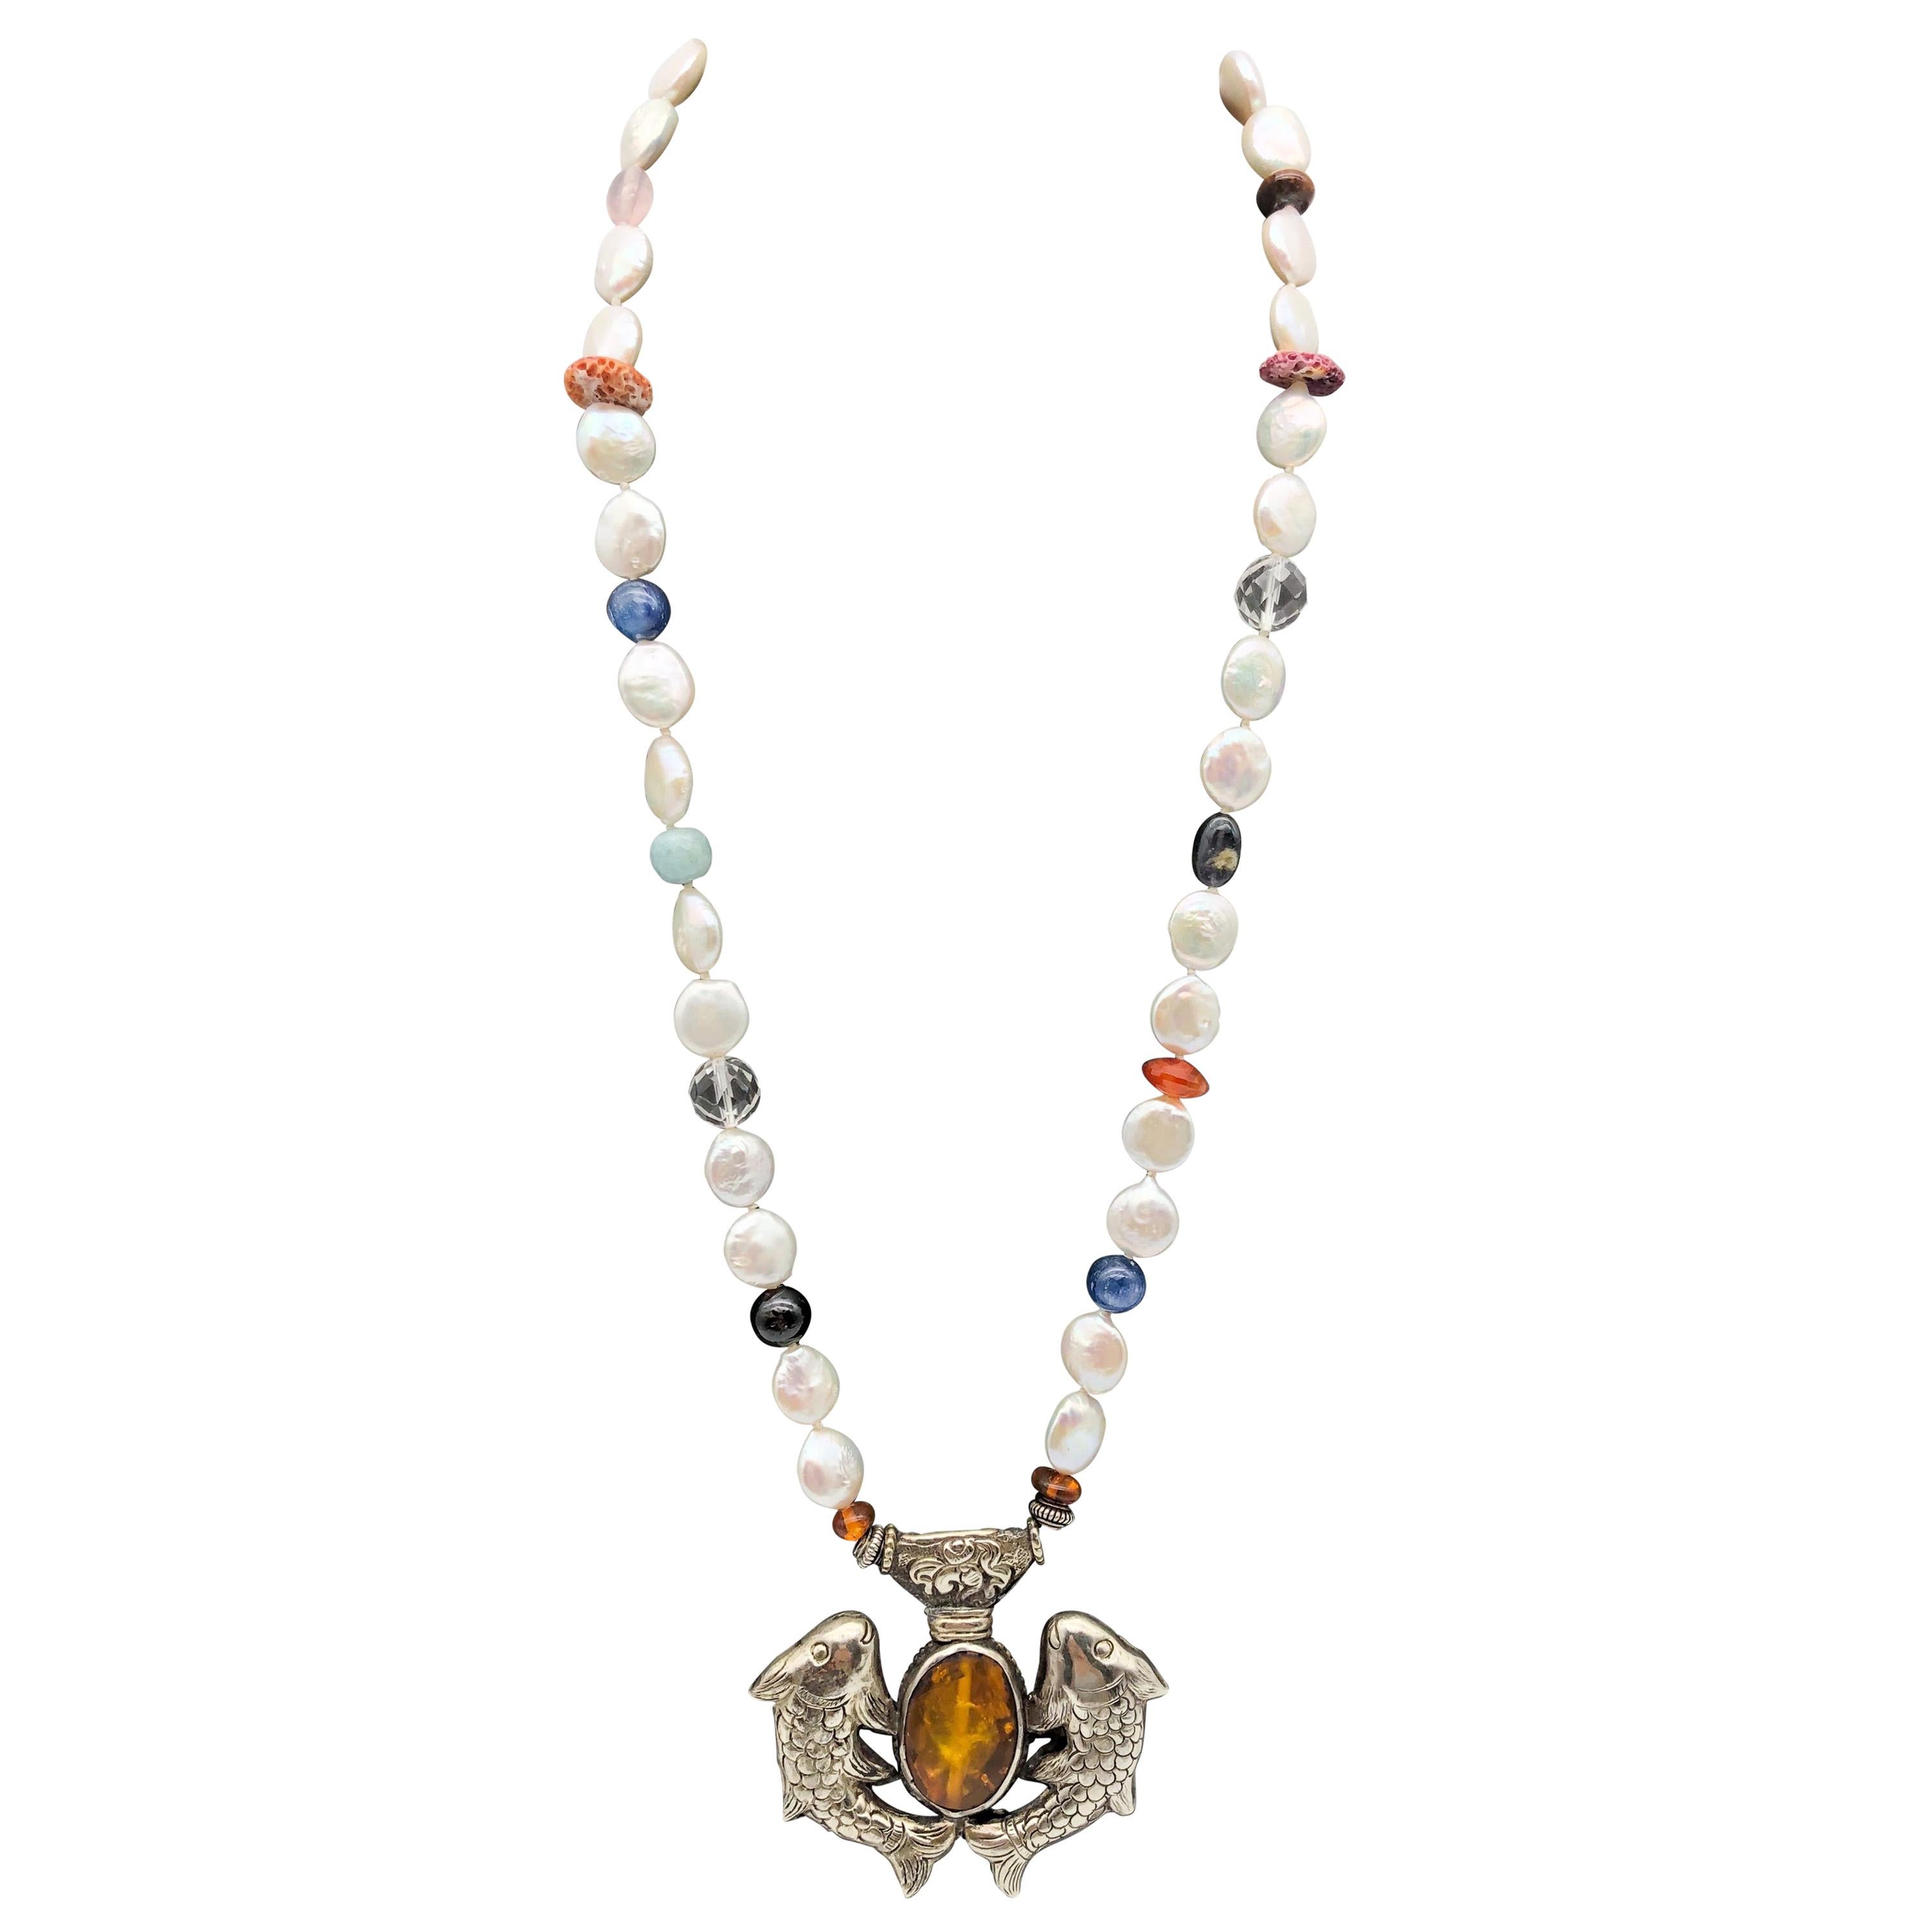 A.Jeschel Tibetan "Two Golden Fish" pendant on Freshwater Pearl necklace. For Sale